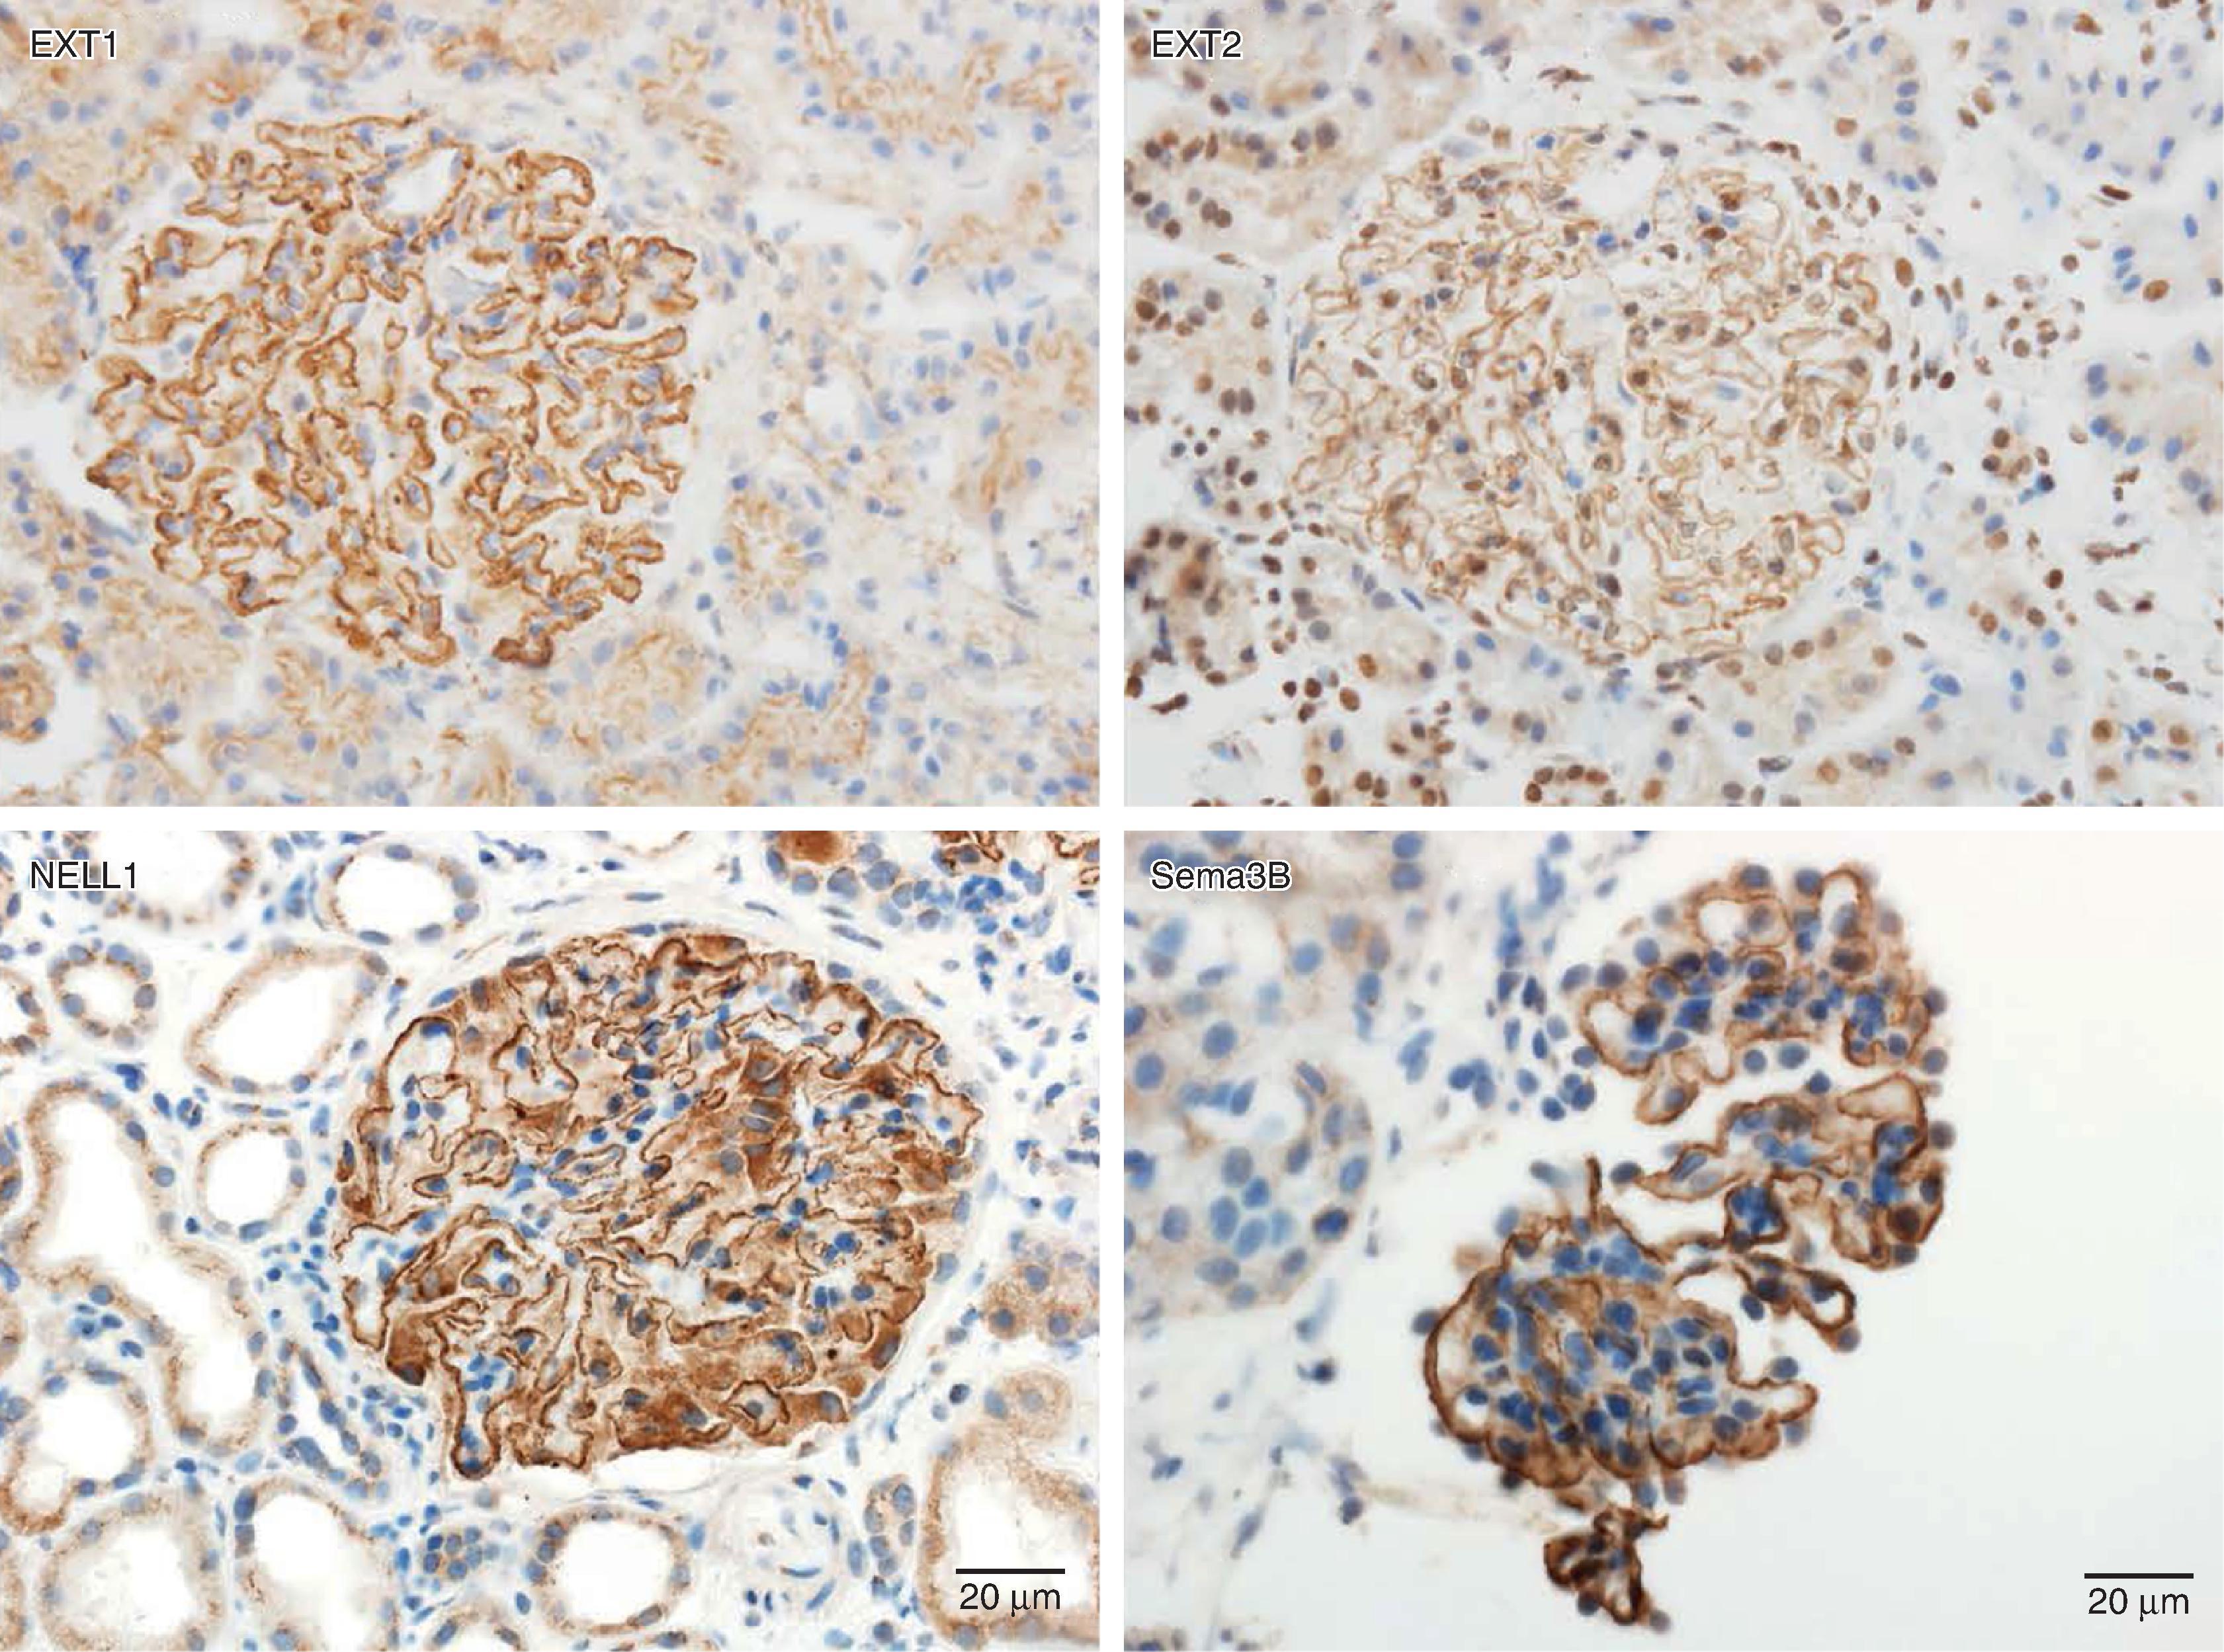 Fig. 16.2, New antigens in MN: immunohistochemistry showing granular staining for EXT1, EXT2, NELL1, and Sema3 along the capillary wall. EXT1 and EXT2 are from the same case; NELL1 and Sema3B represent one case each (all ×40).